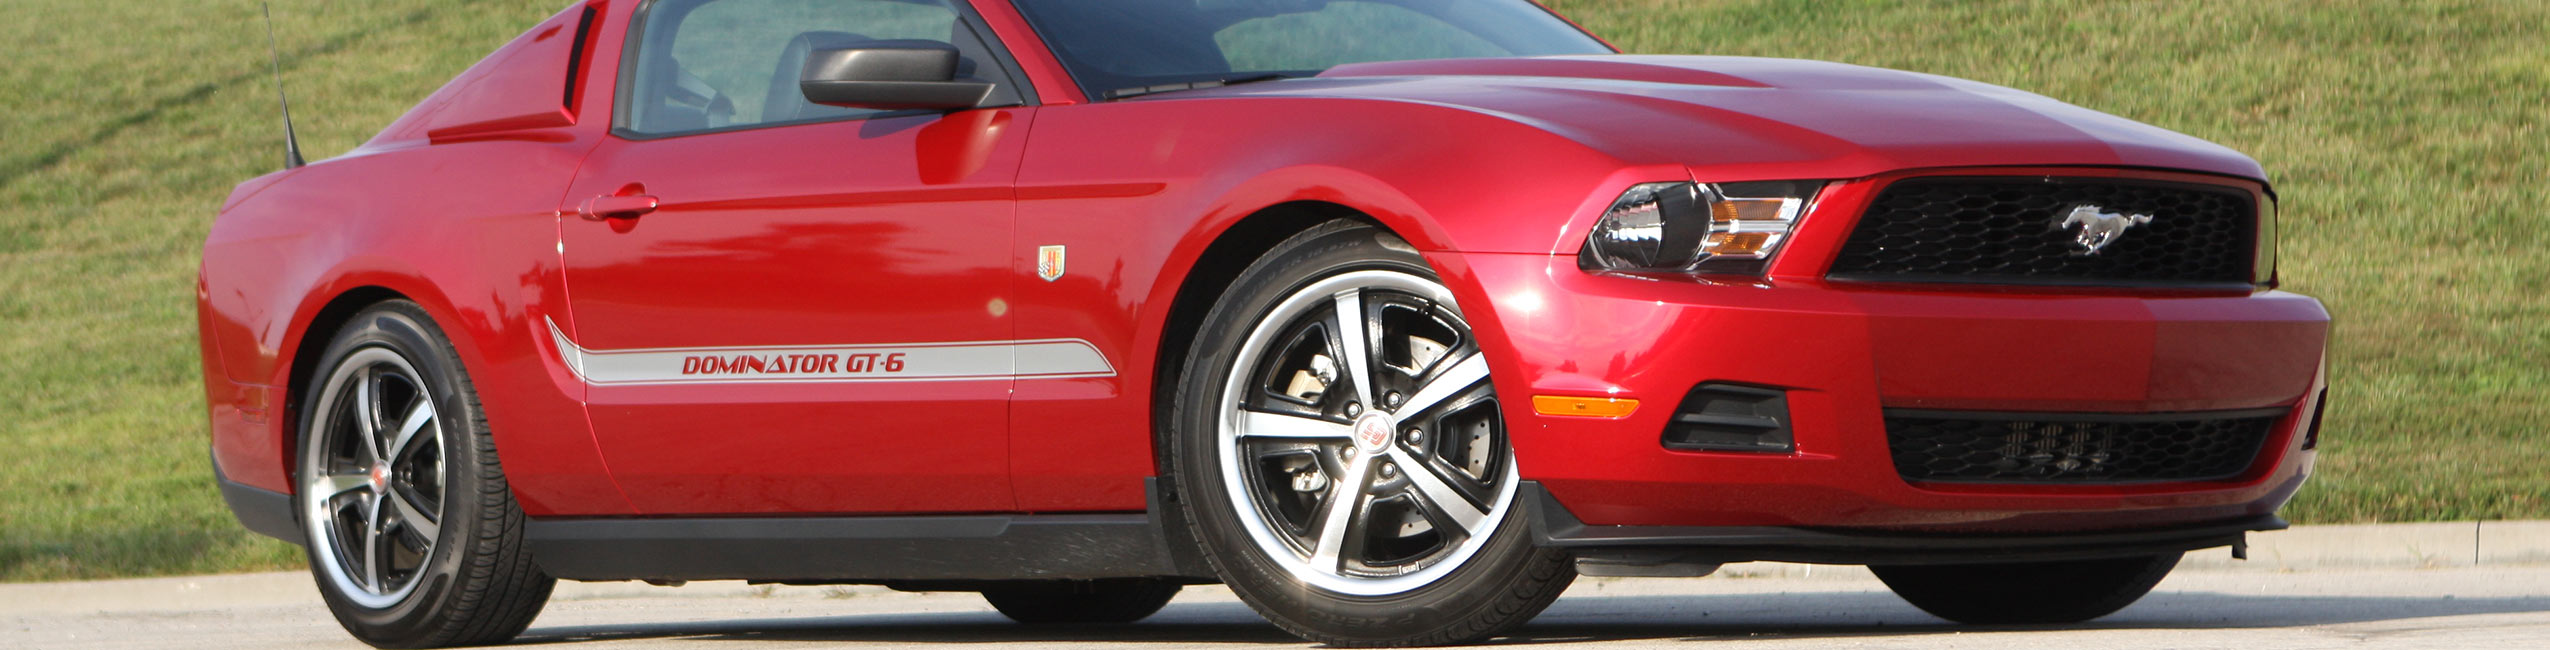 2010 Ford Mustang V6 with ProCharger supercharger